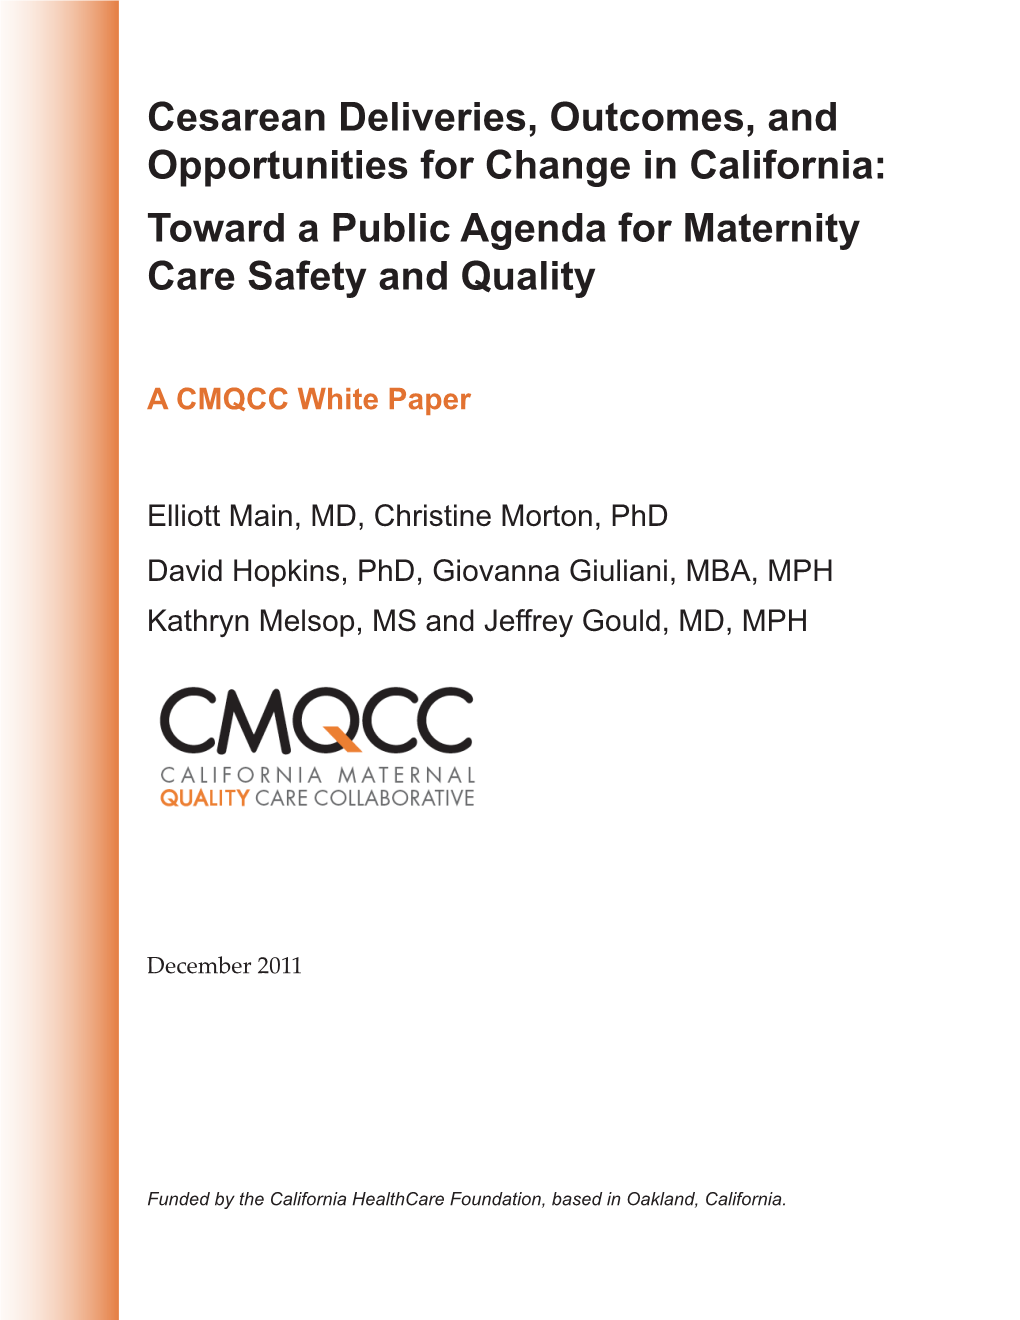 Cesarean Deliveries, Outcomes, and Opportunities for Change in California: Toward a Public Agenda for Maternity Care Safety and Quality